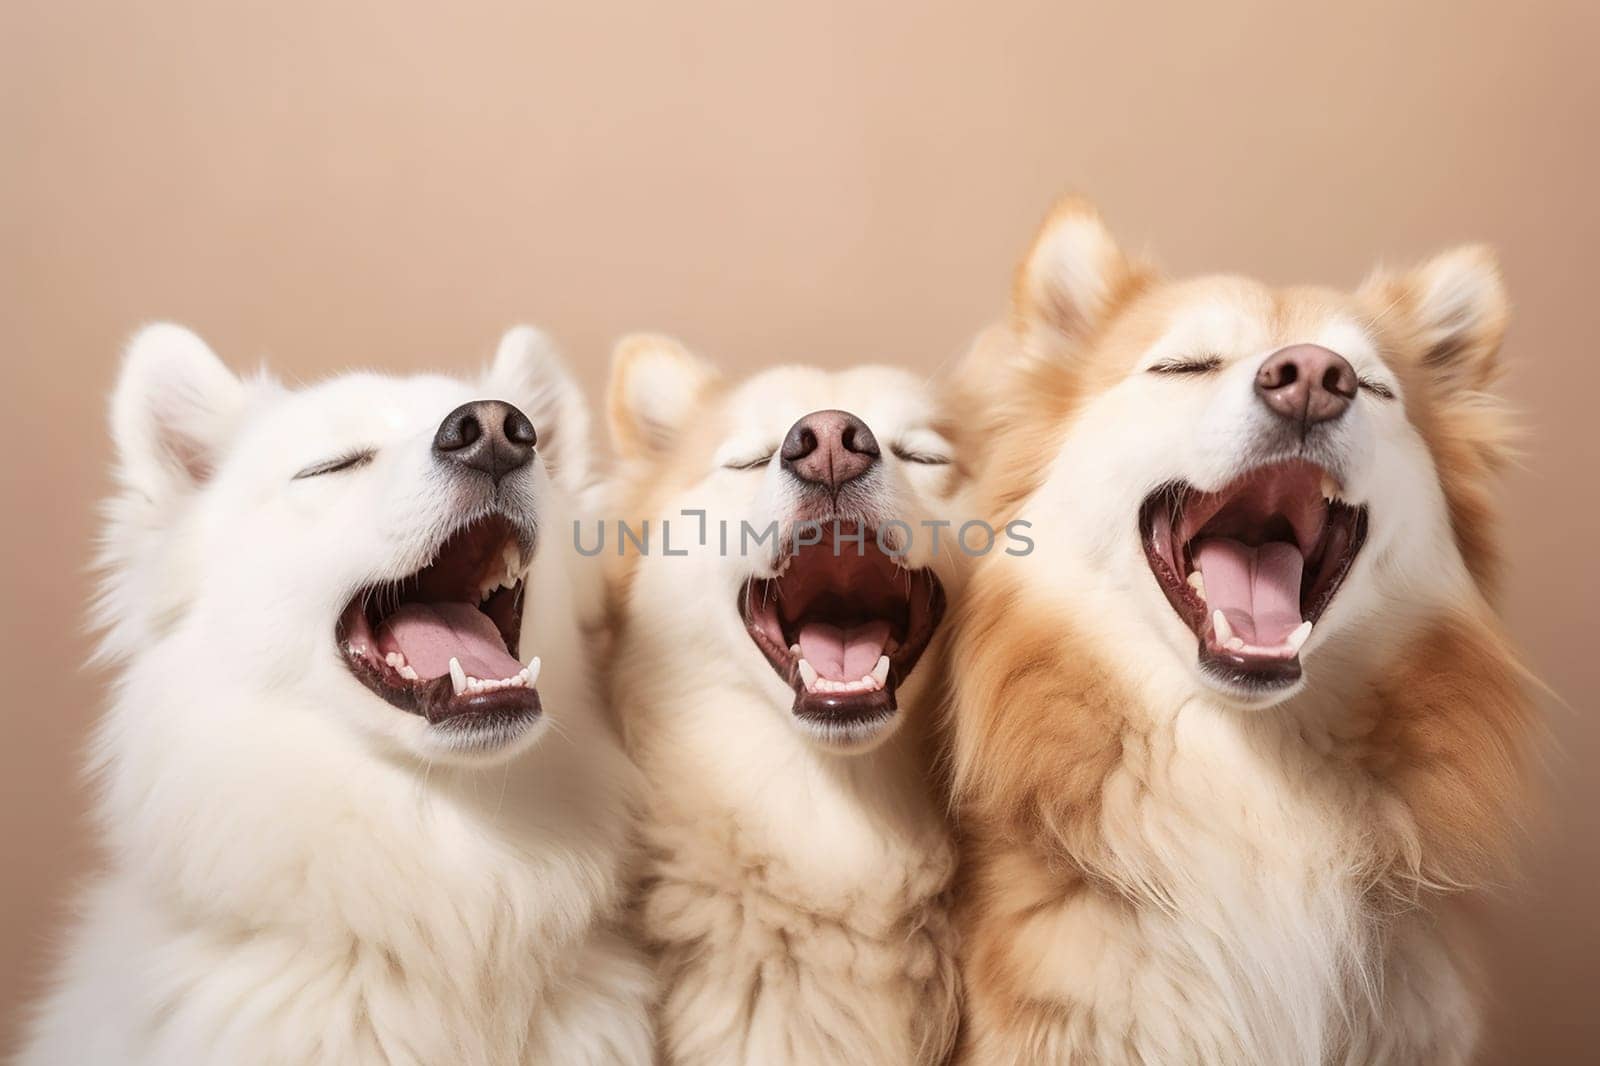 A happy and funny dog looking in front, neutral background